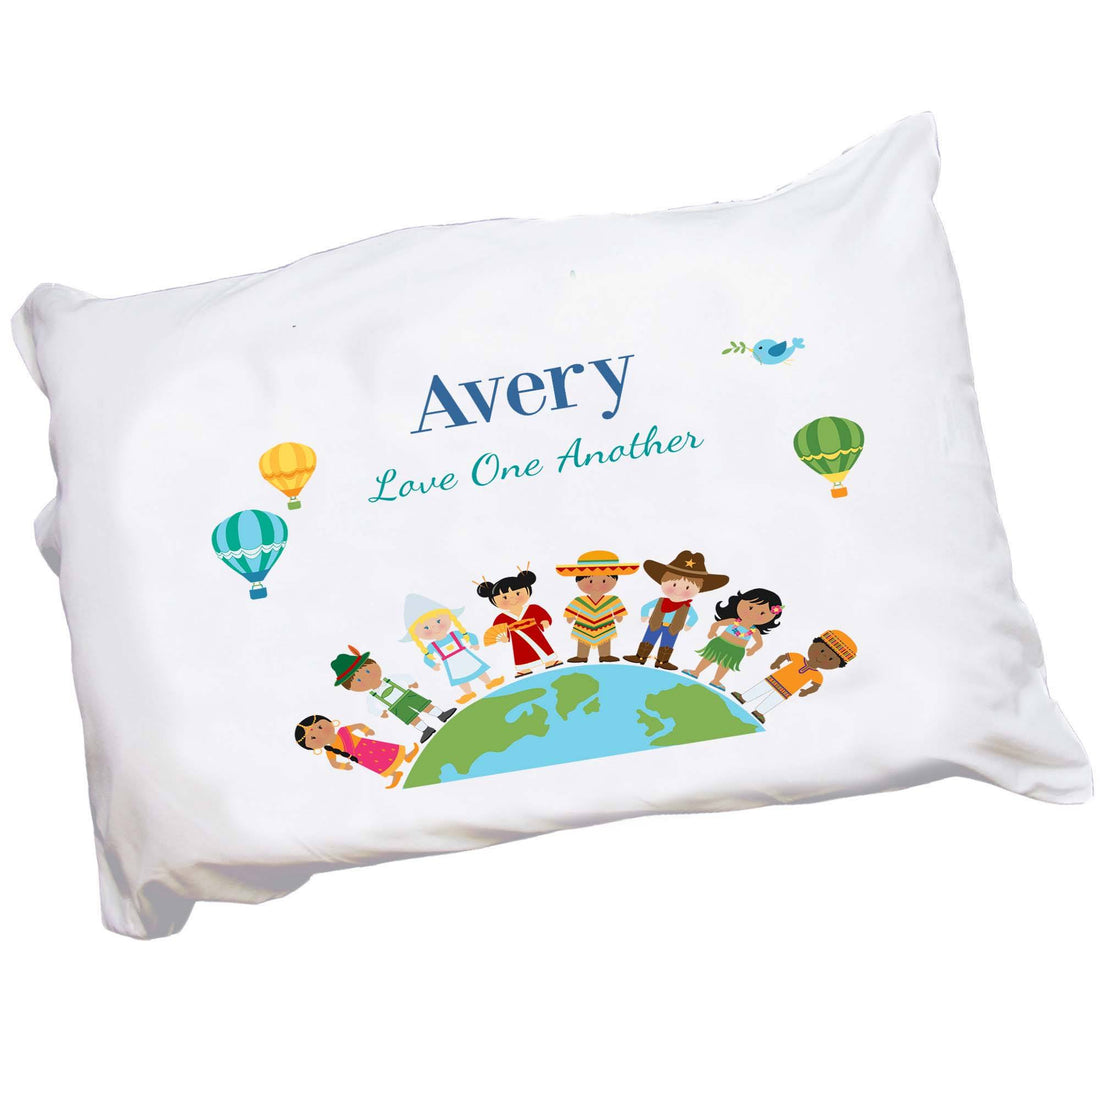 Personalized Childrens Pillowcase with Small World design